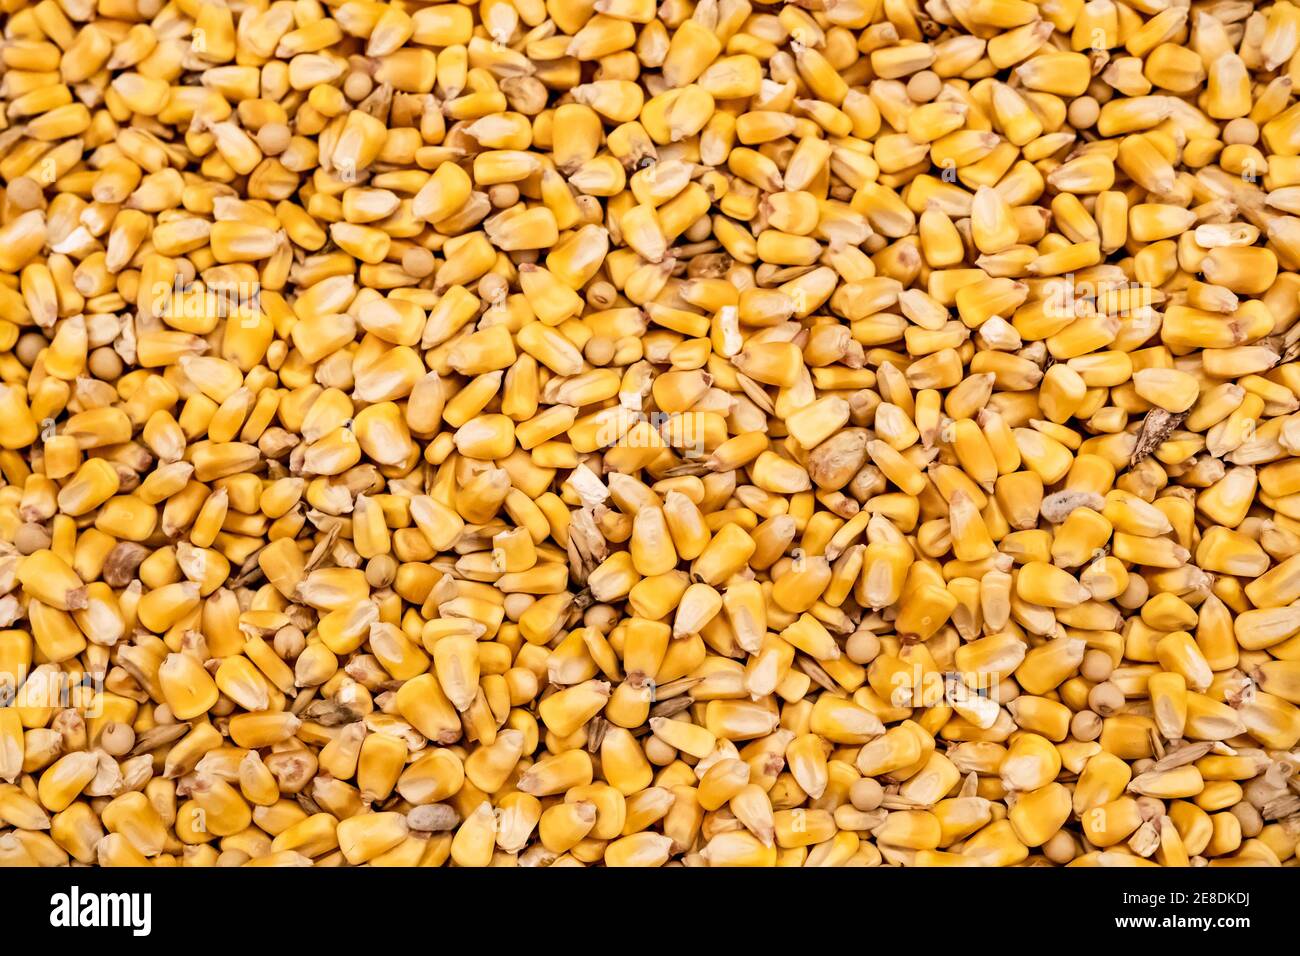 Agricultural background of yellow corn kernels Stock Photo